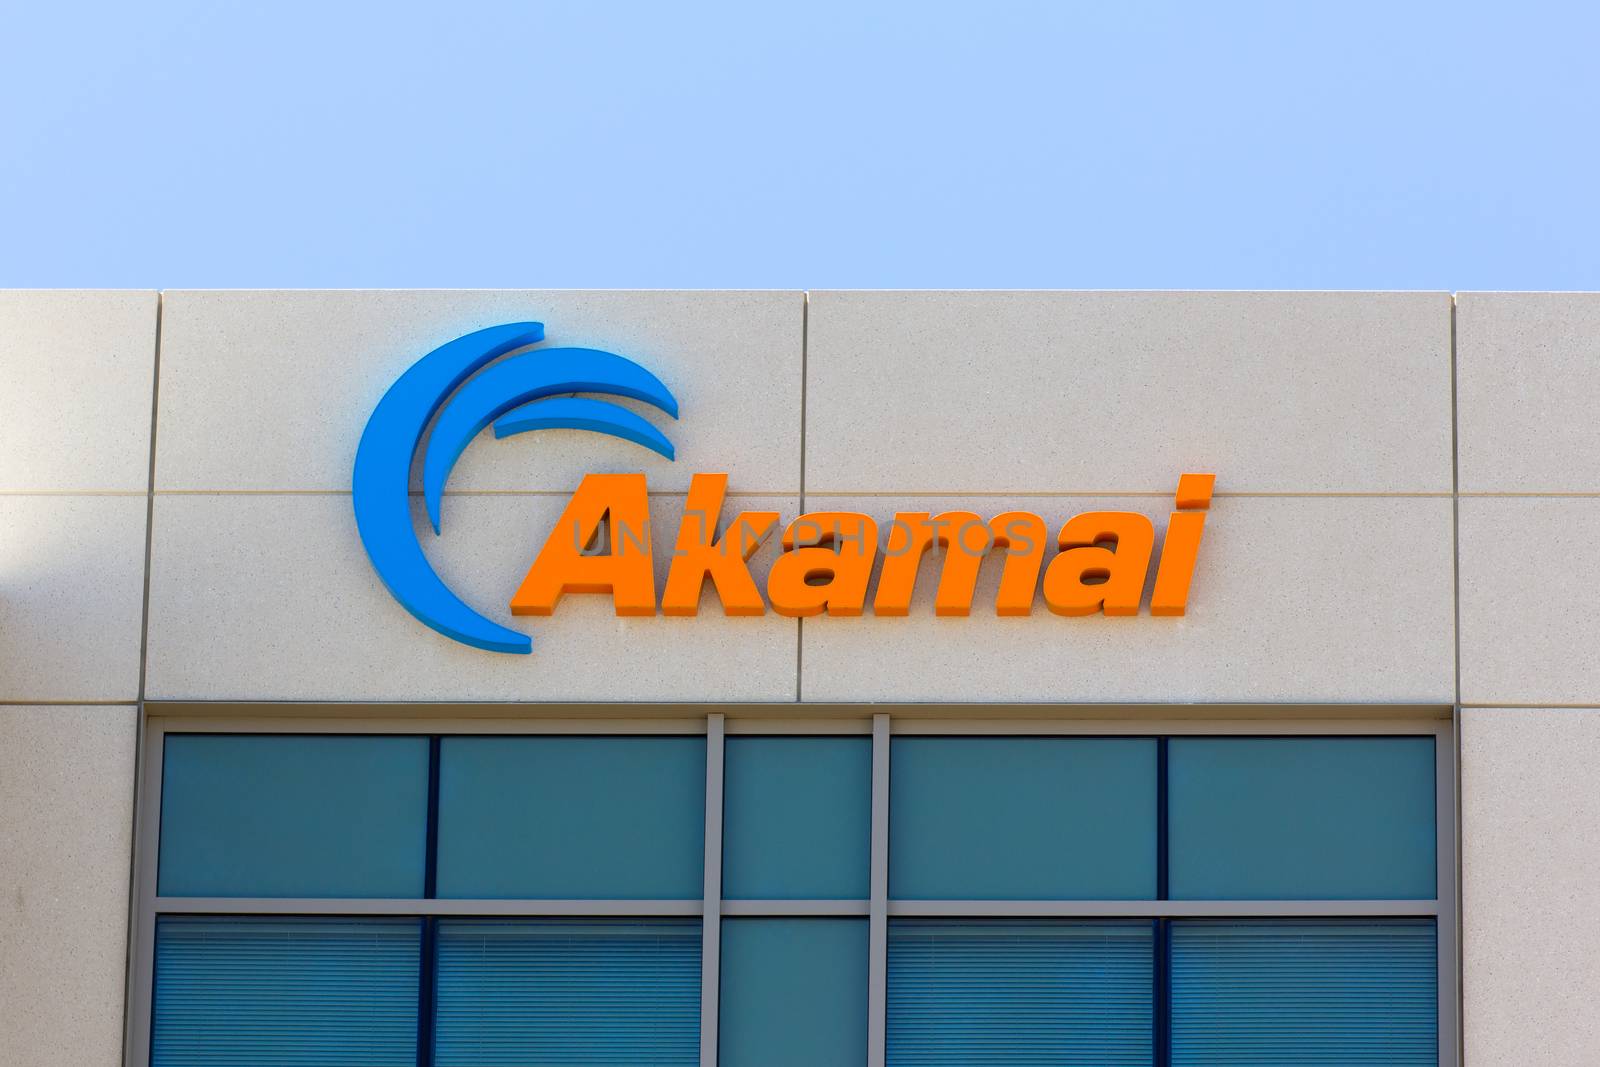 SANTA CLARA,CA/USA - MAY 11, 2014: Akamai building in Silicon Valley. Akamai is an Internet content delivery network and a distributed-computing platform.